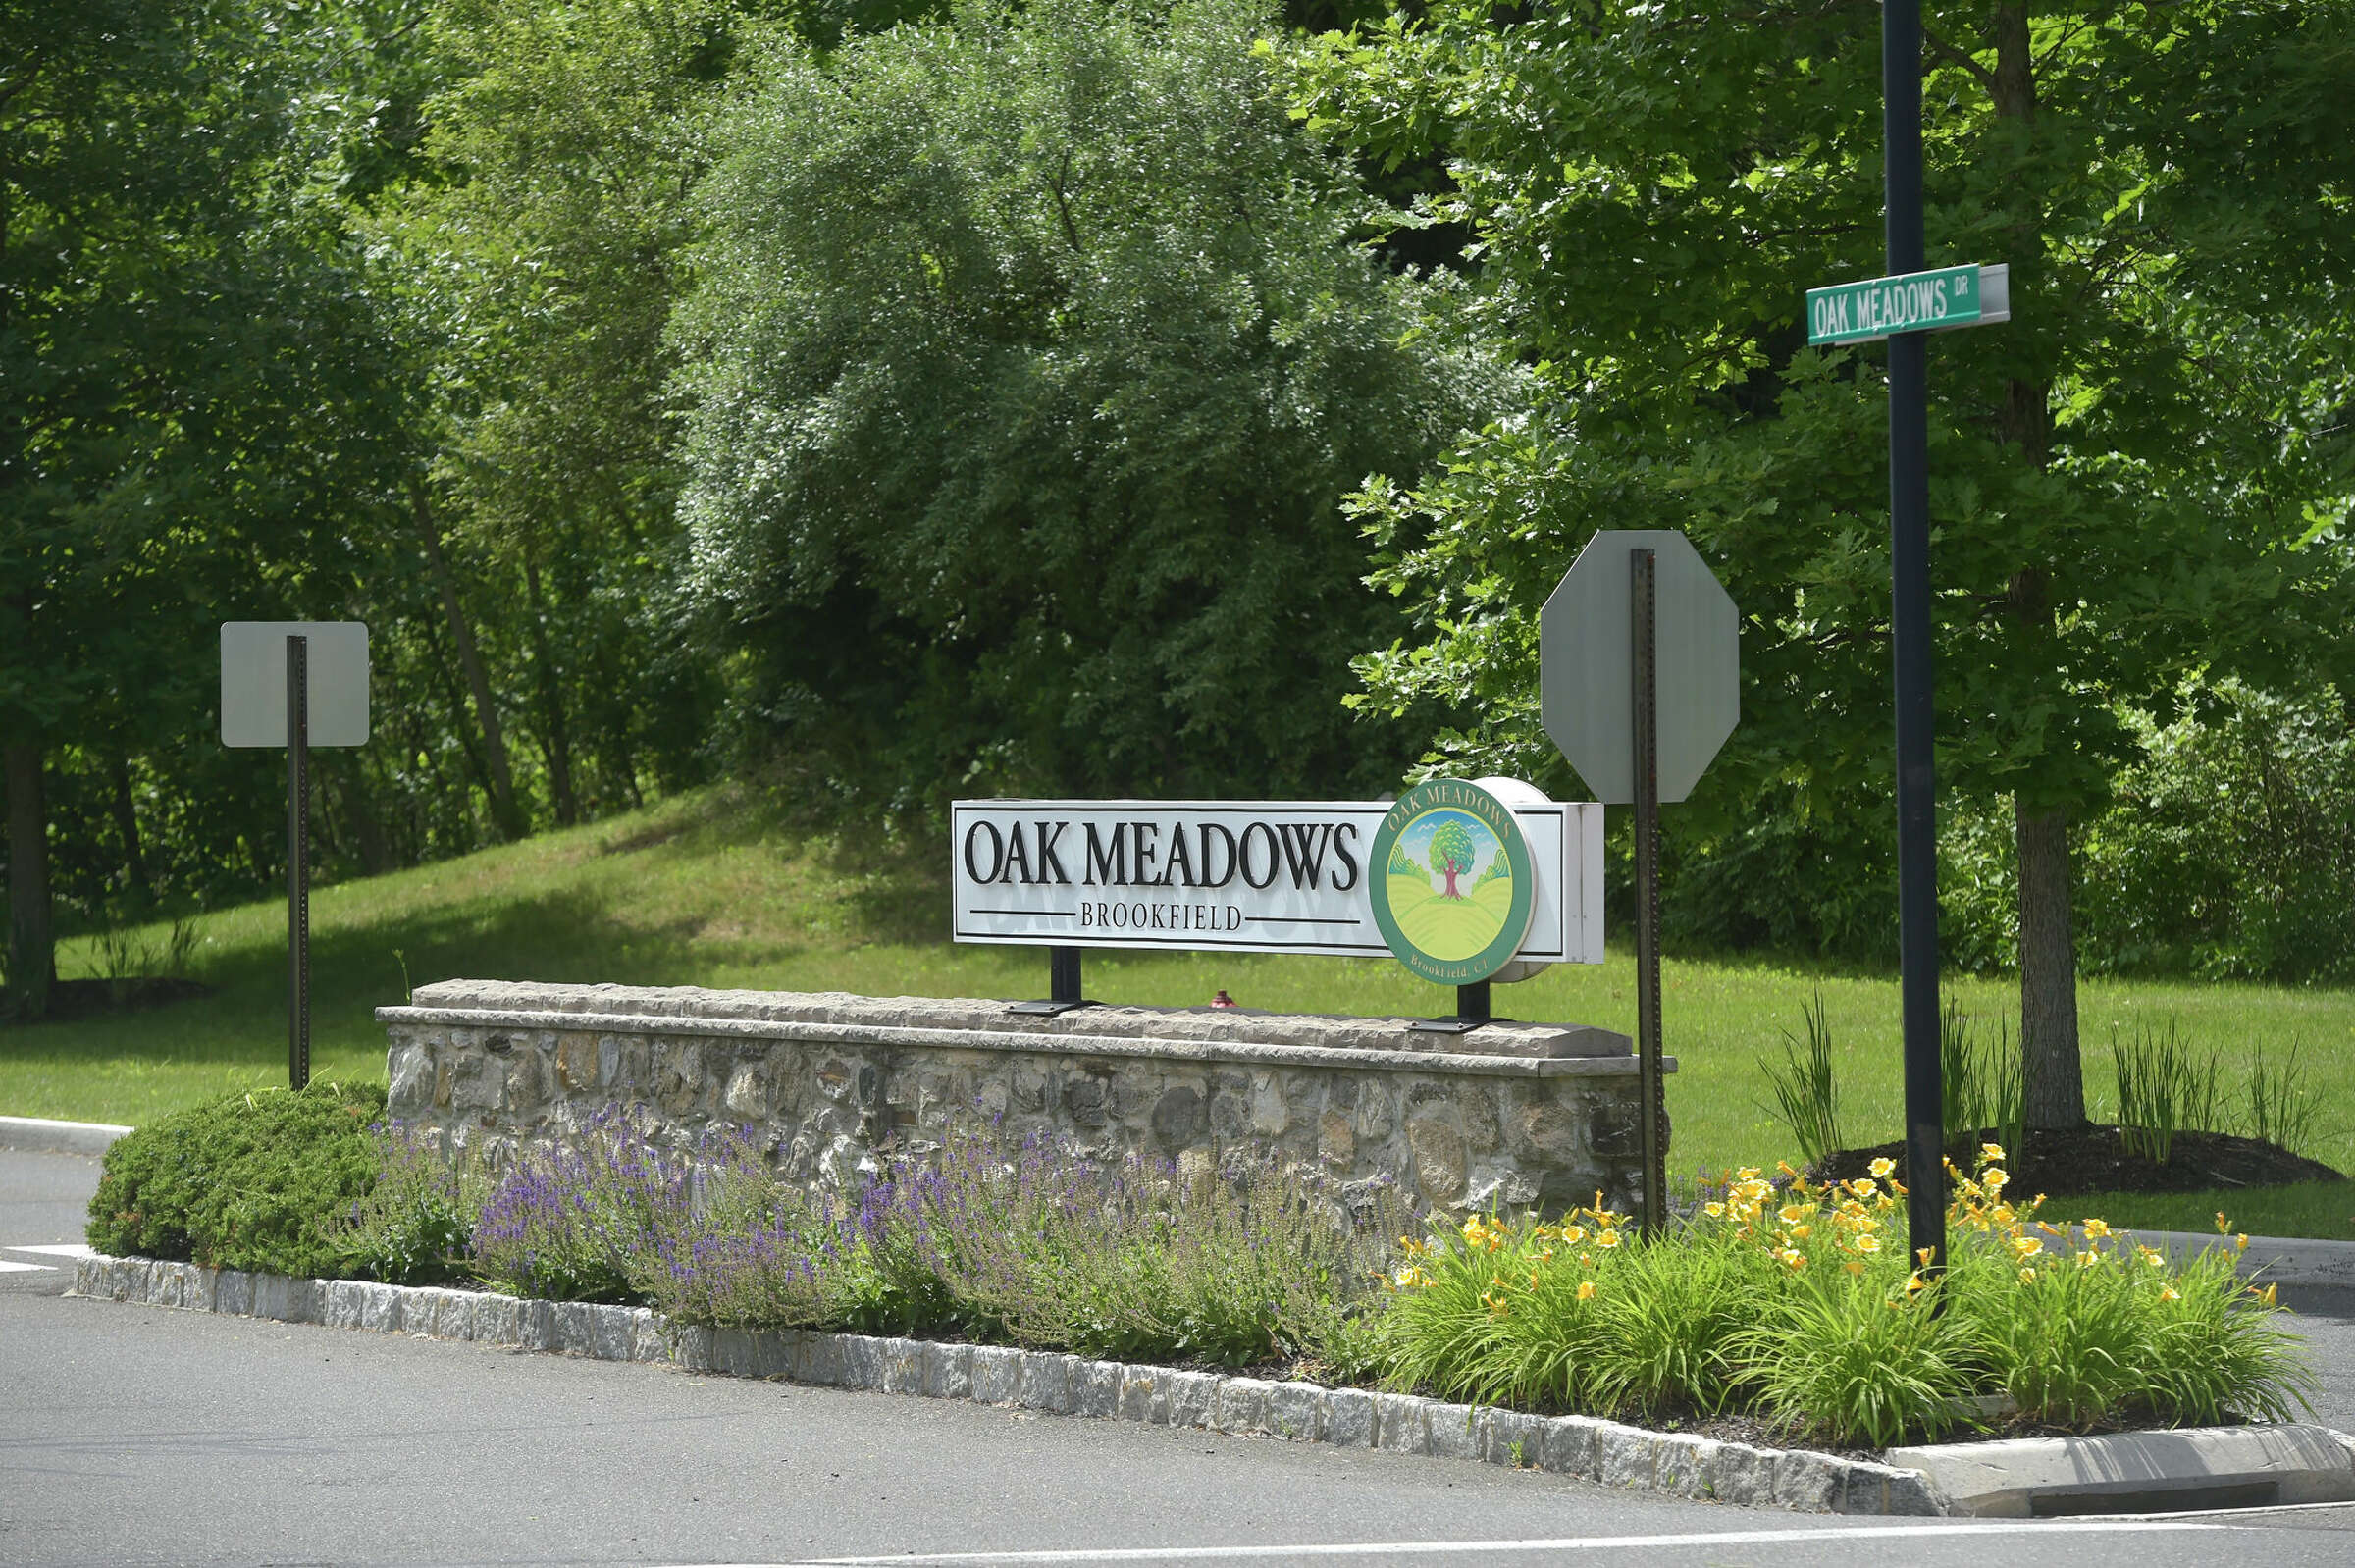 Residents of Oak Meadows complex in Brookfield share mixed reactions to the DNA testing policy.